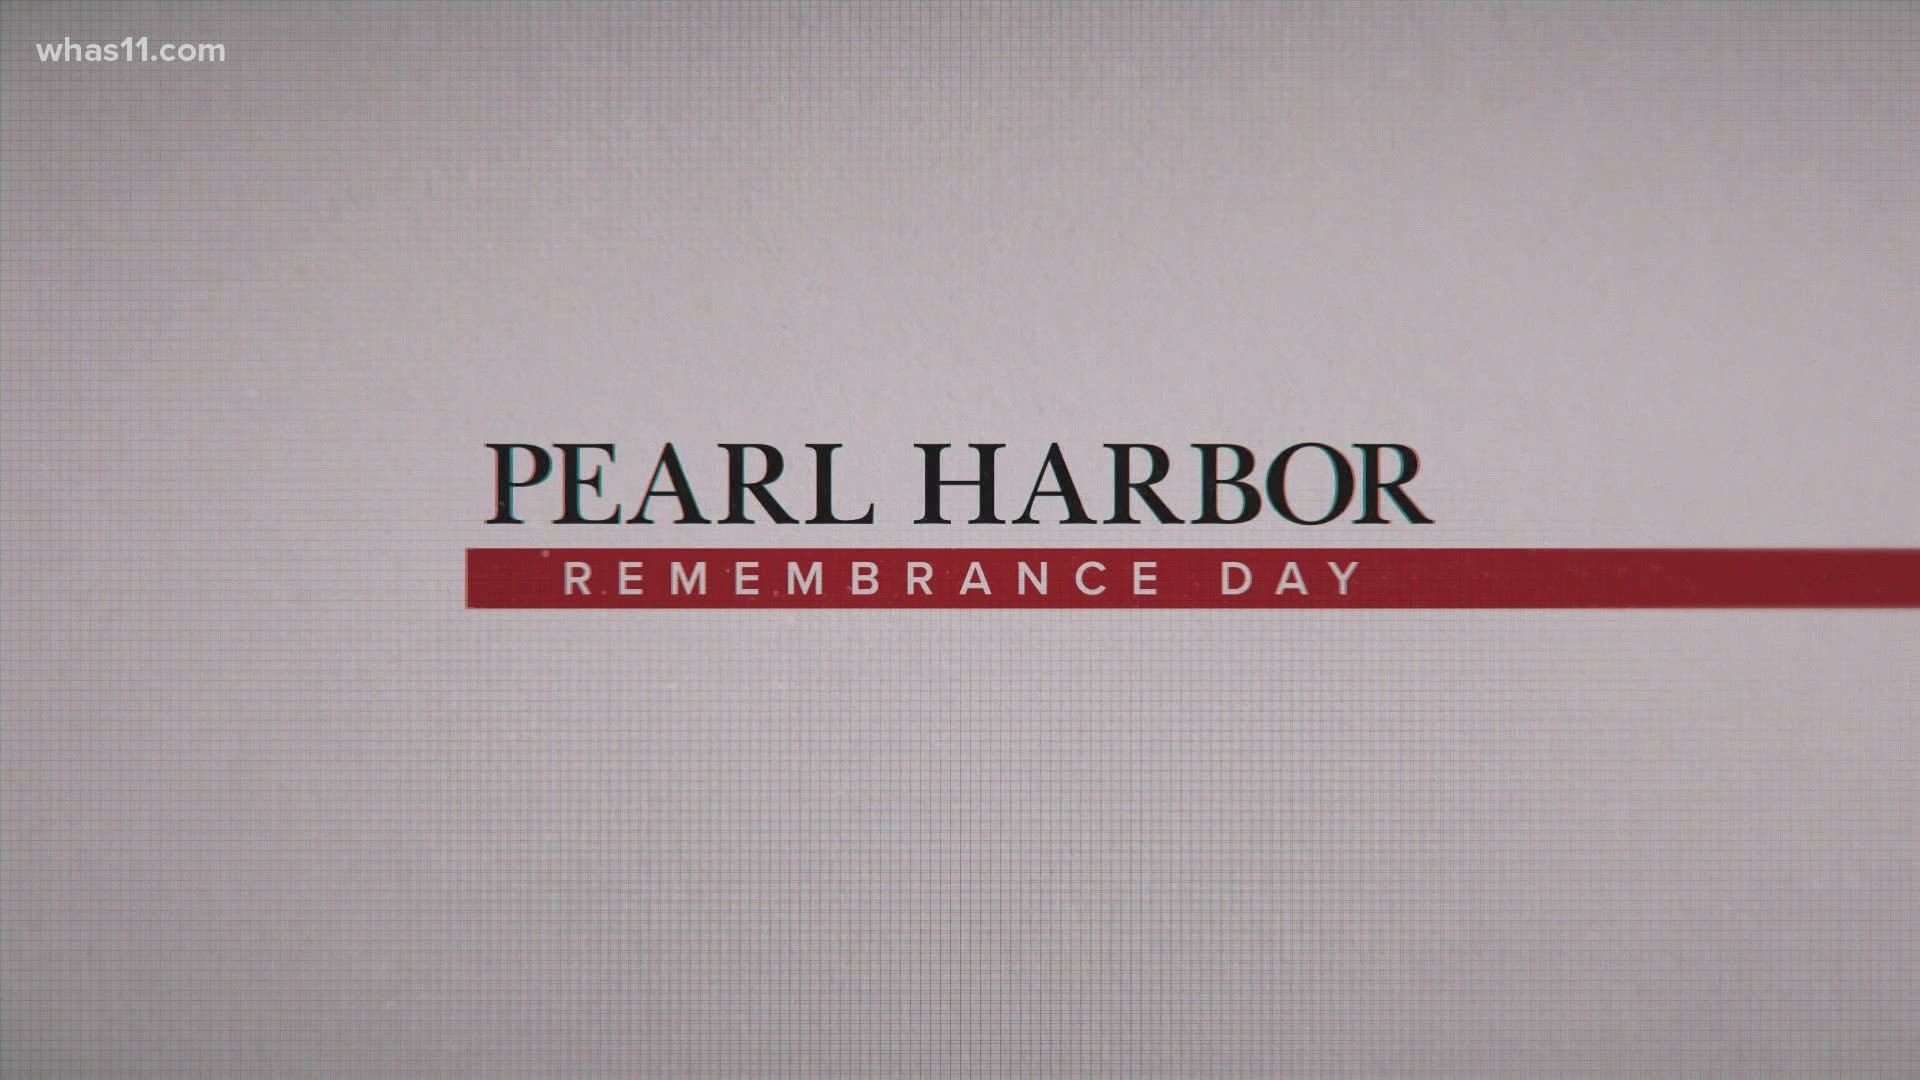 Monday marks 79 years since the tragic attack on Pearl Harbor in 1941.